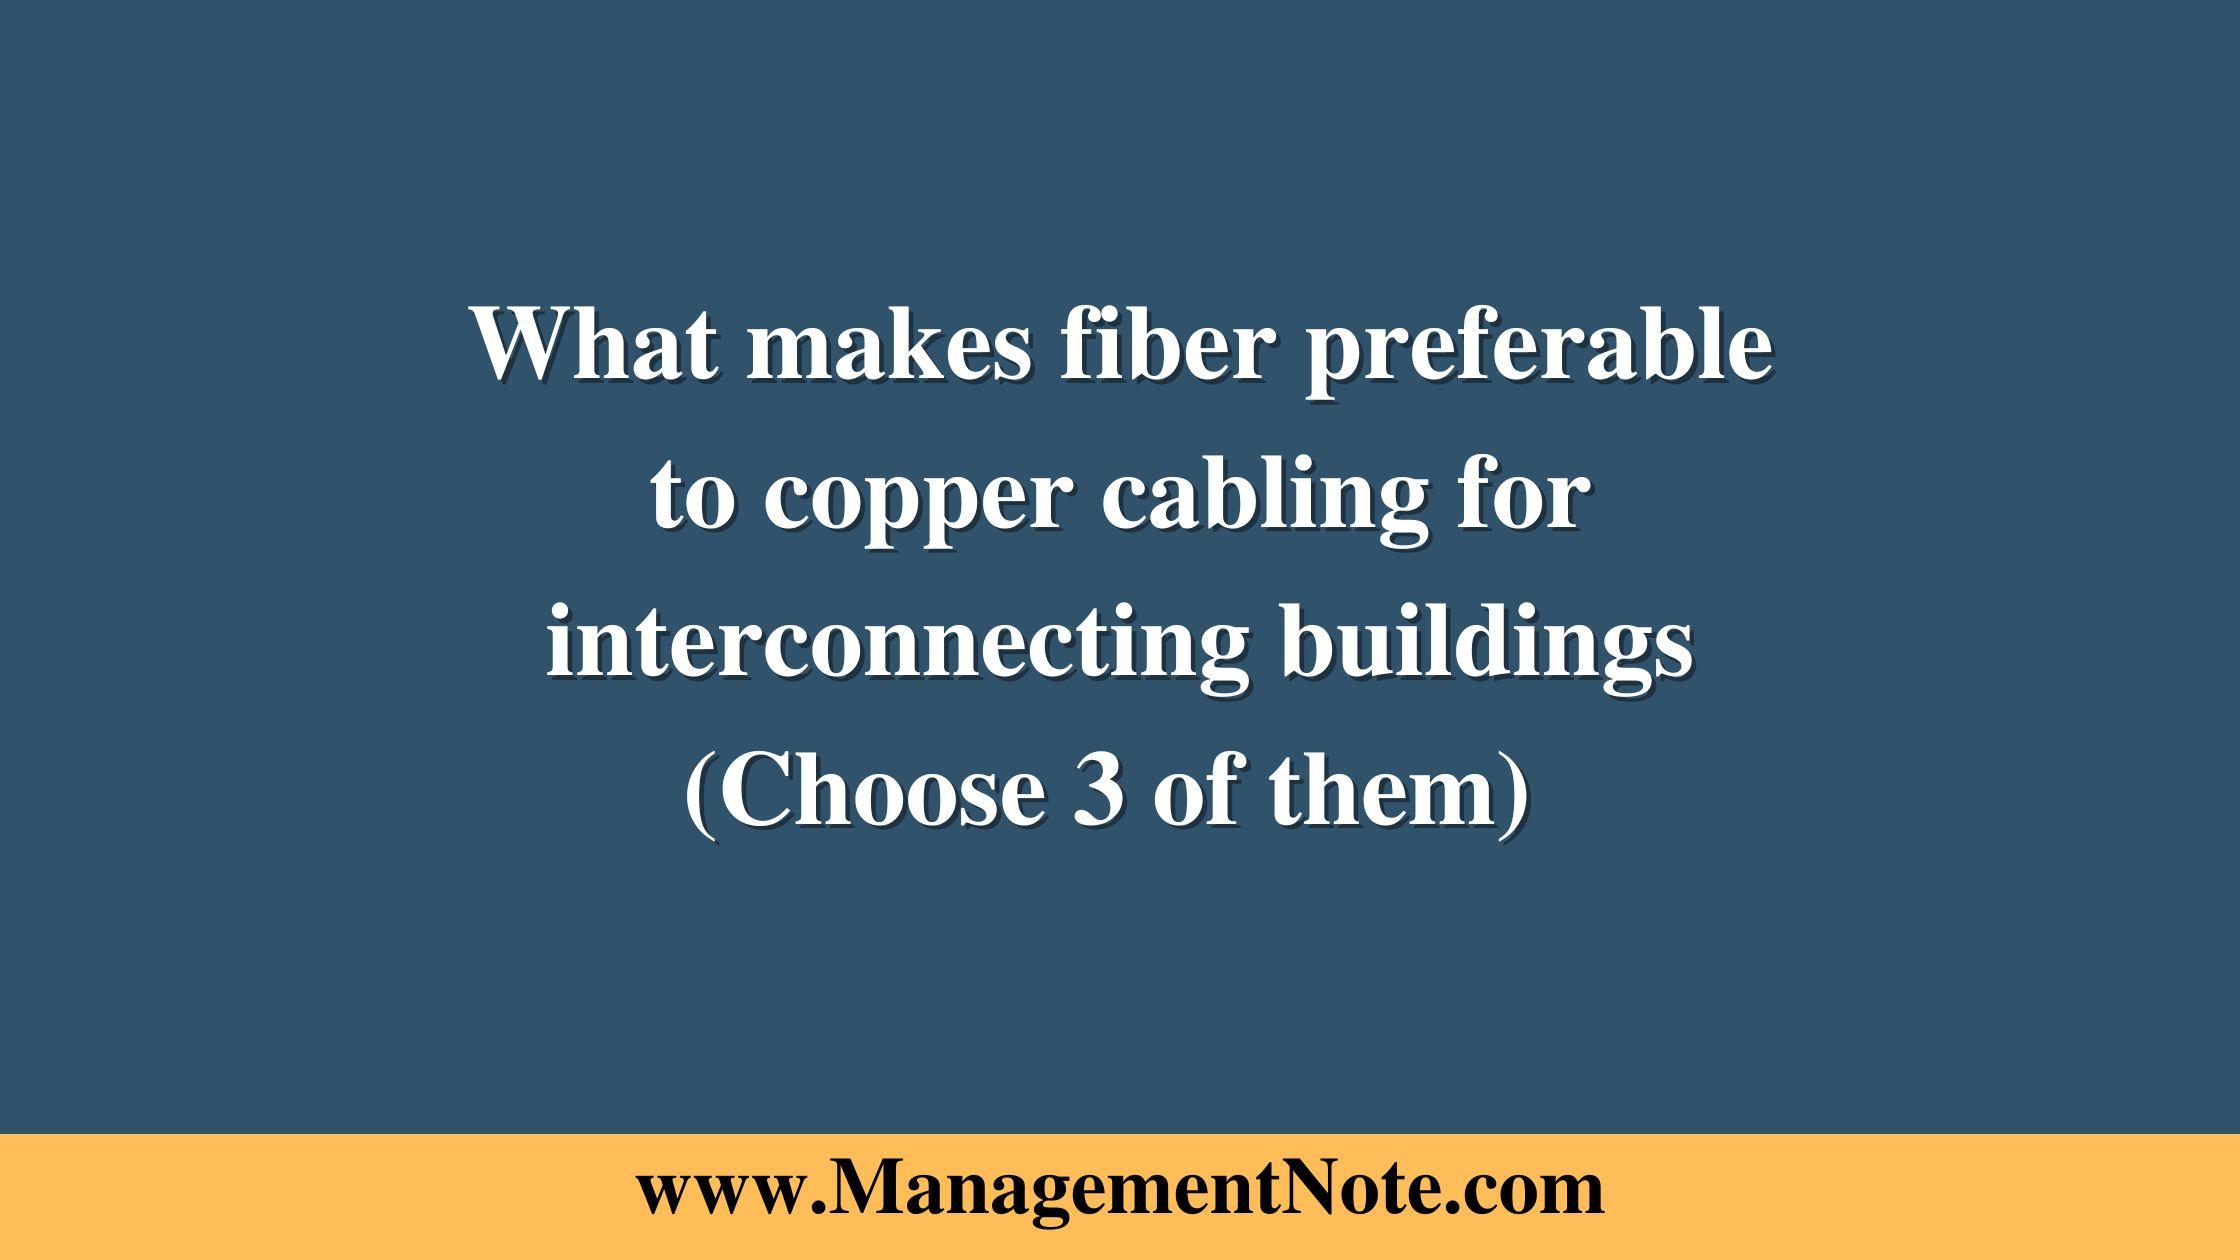 What makes fiber preferable to copper cabling for interconnecting buildings (Choose 3 of them) 